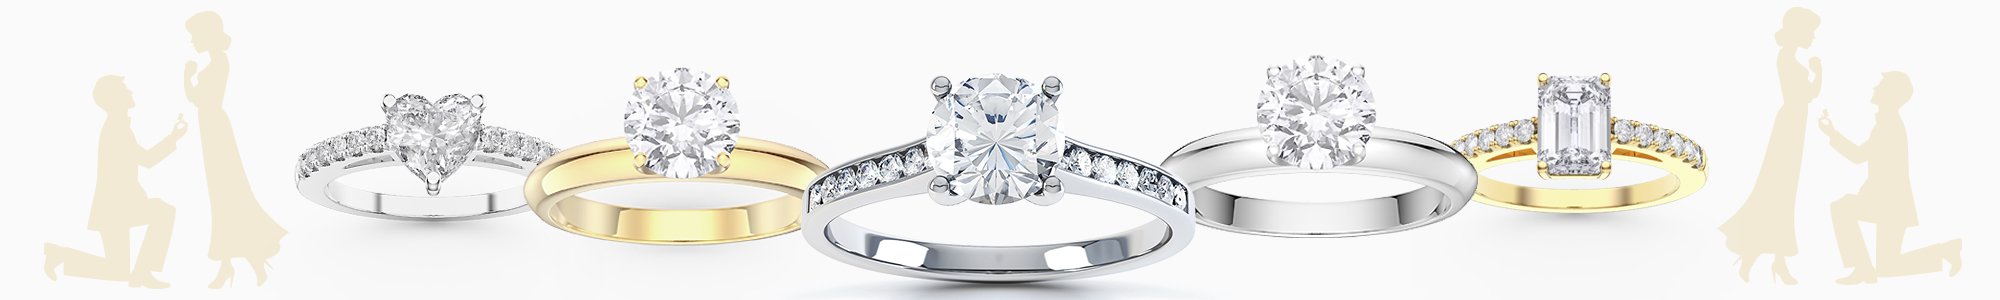 Shop Engagement Rings by Jian London. Buy direct and save from our wide selection of engagement rings at the Jian London Jewellery Store. Free UK Delivery.